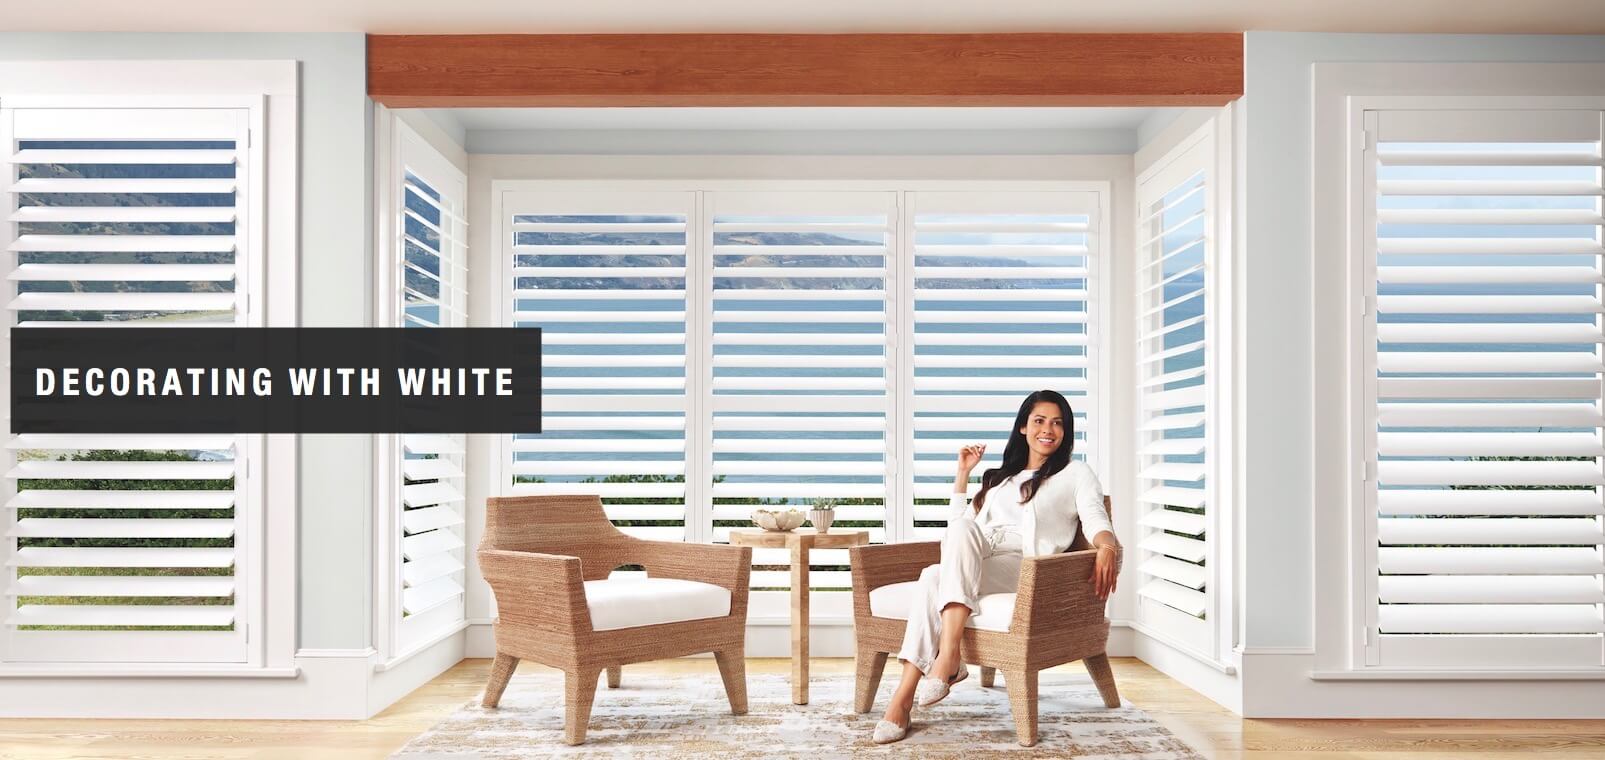 White Palm Beach™ Polysatin™ shutters and accents make this room feel bright, airy and cool.